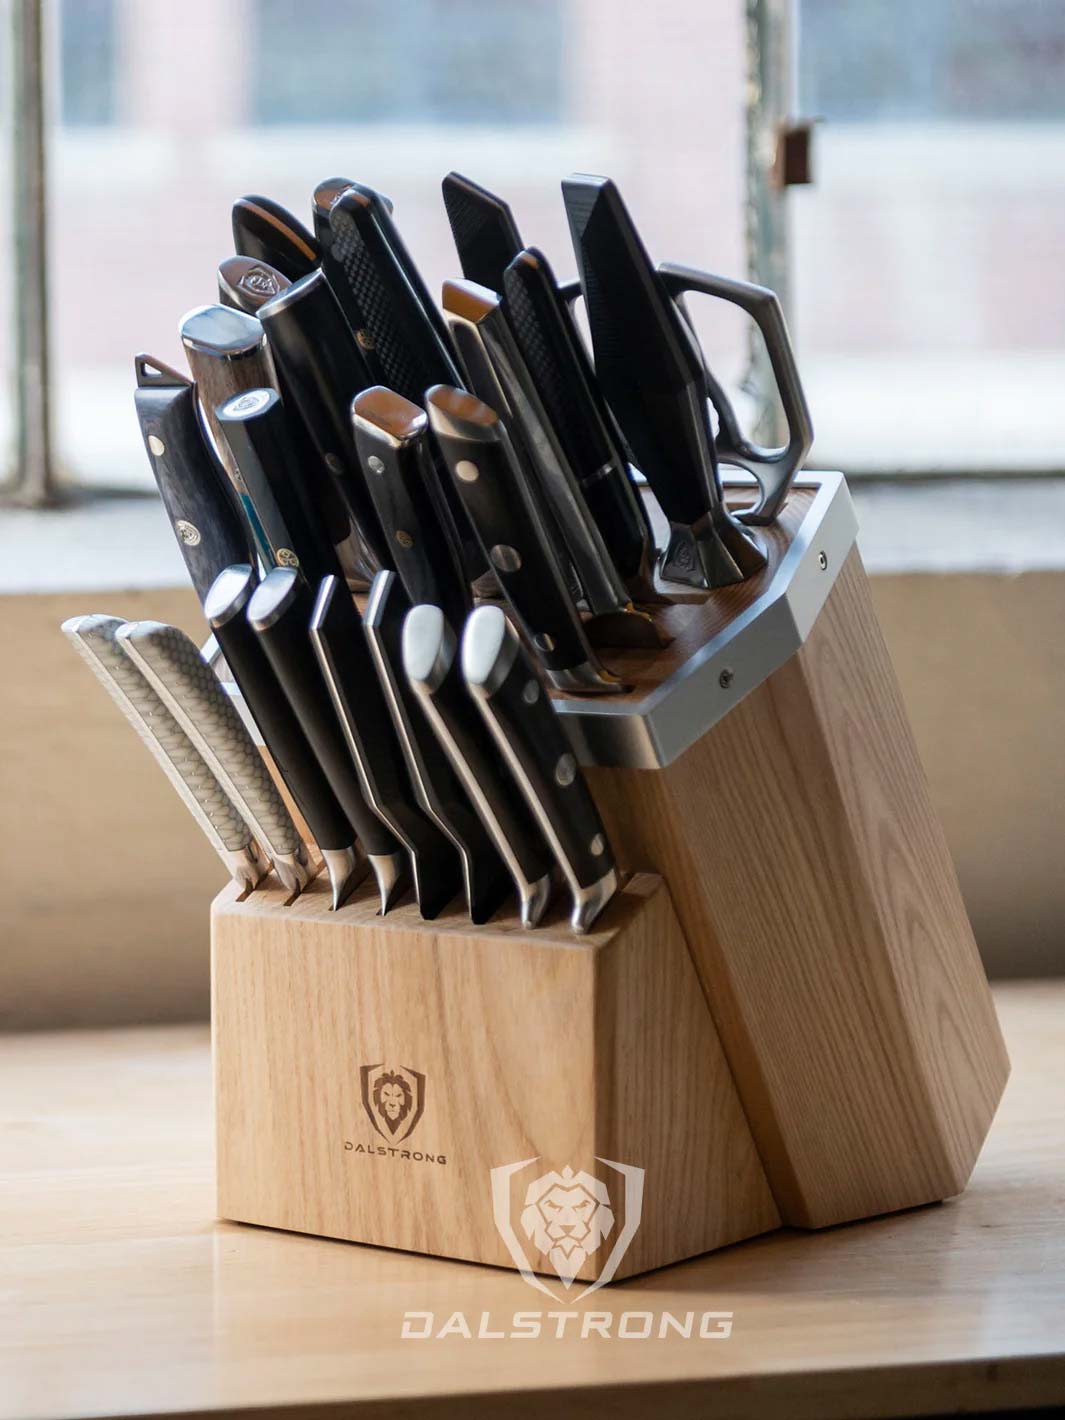 Dalstrong 23 slots universal knife block full with knives and a scissor.